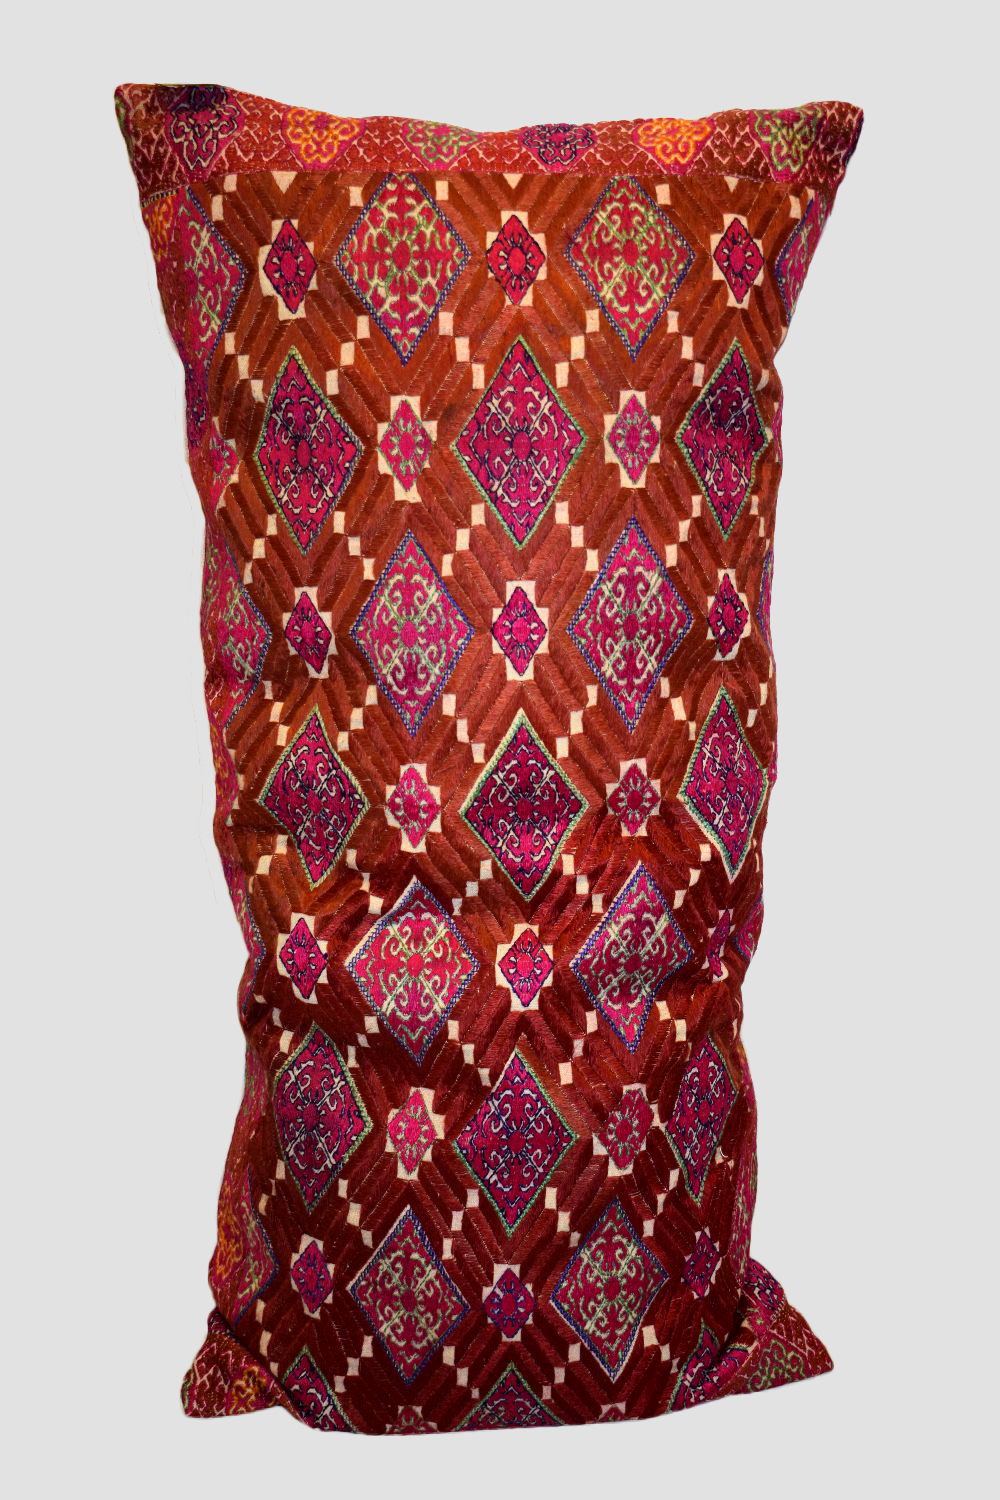 Swat Valley floss silk embroidered bolster, Pakistan, second half 20th century, 32in. X 16in.